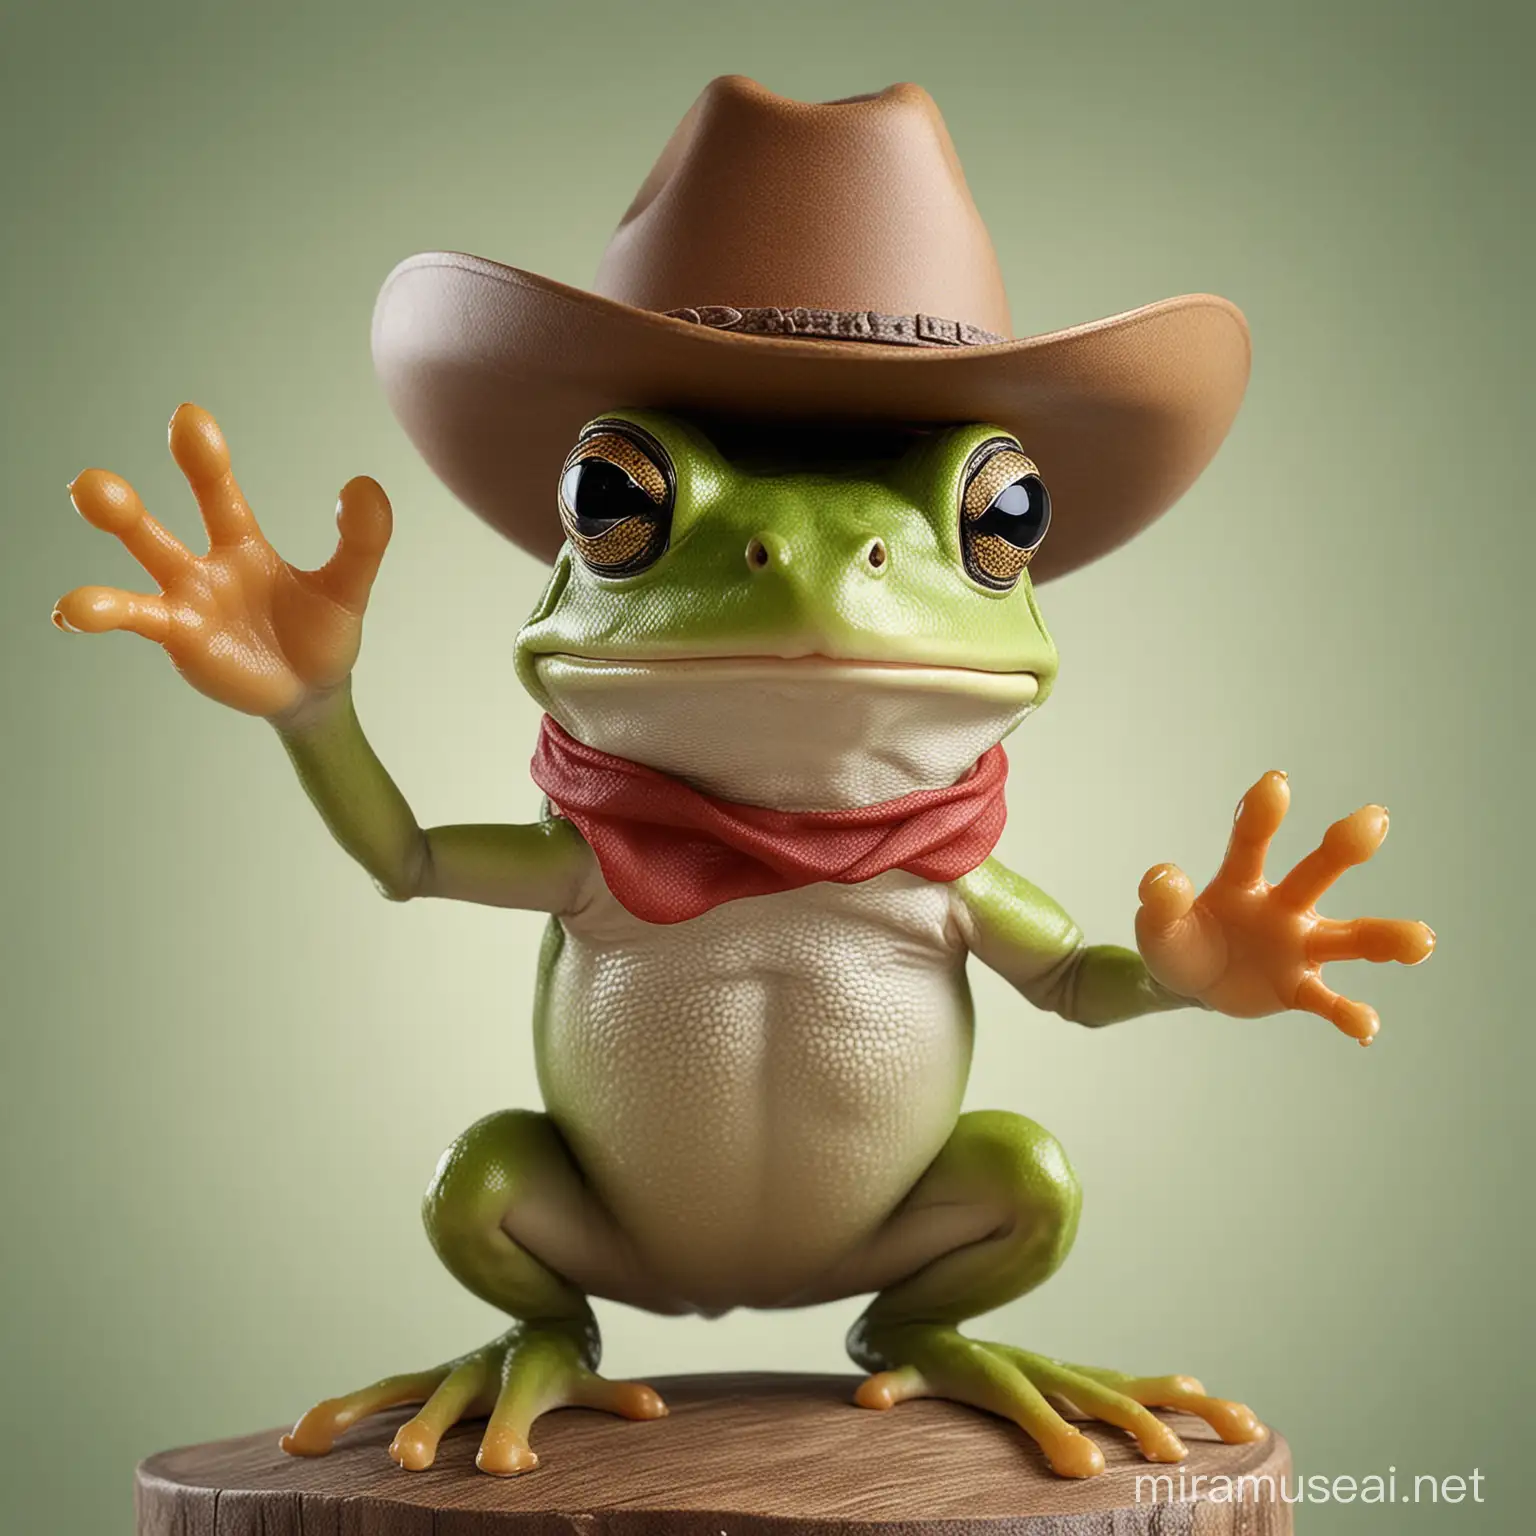 frog wearing cowboy hat, one hand up